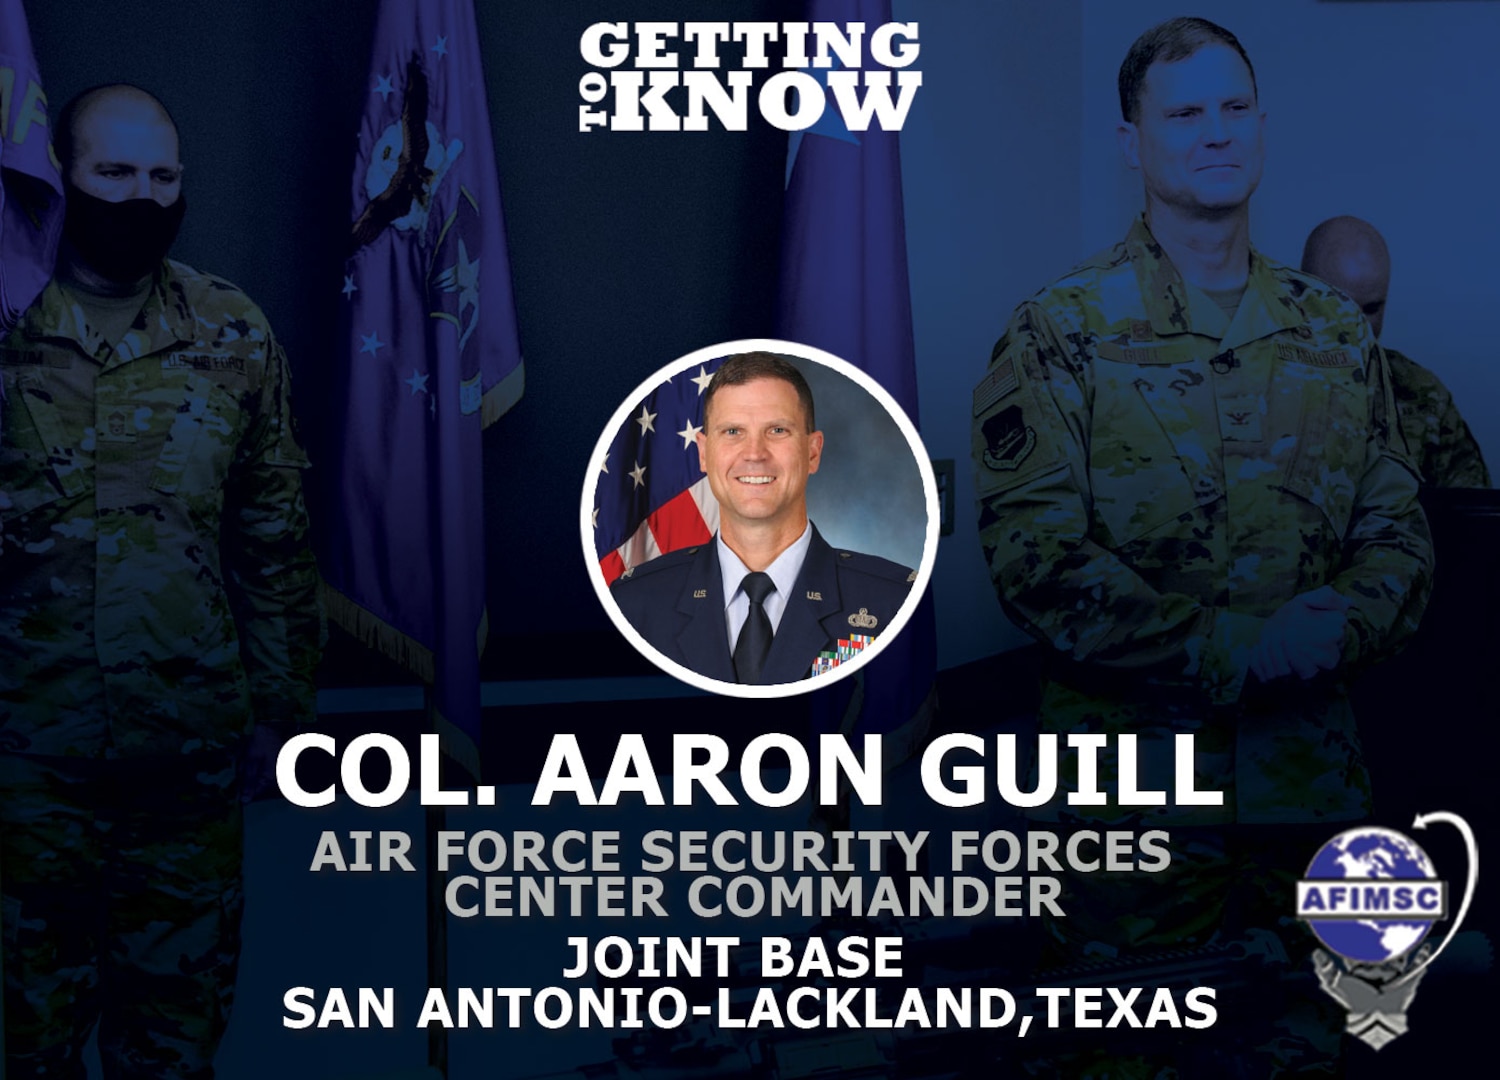 Graphic to introduce Col. Aaron Guill to the AFIMSC team.